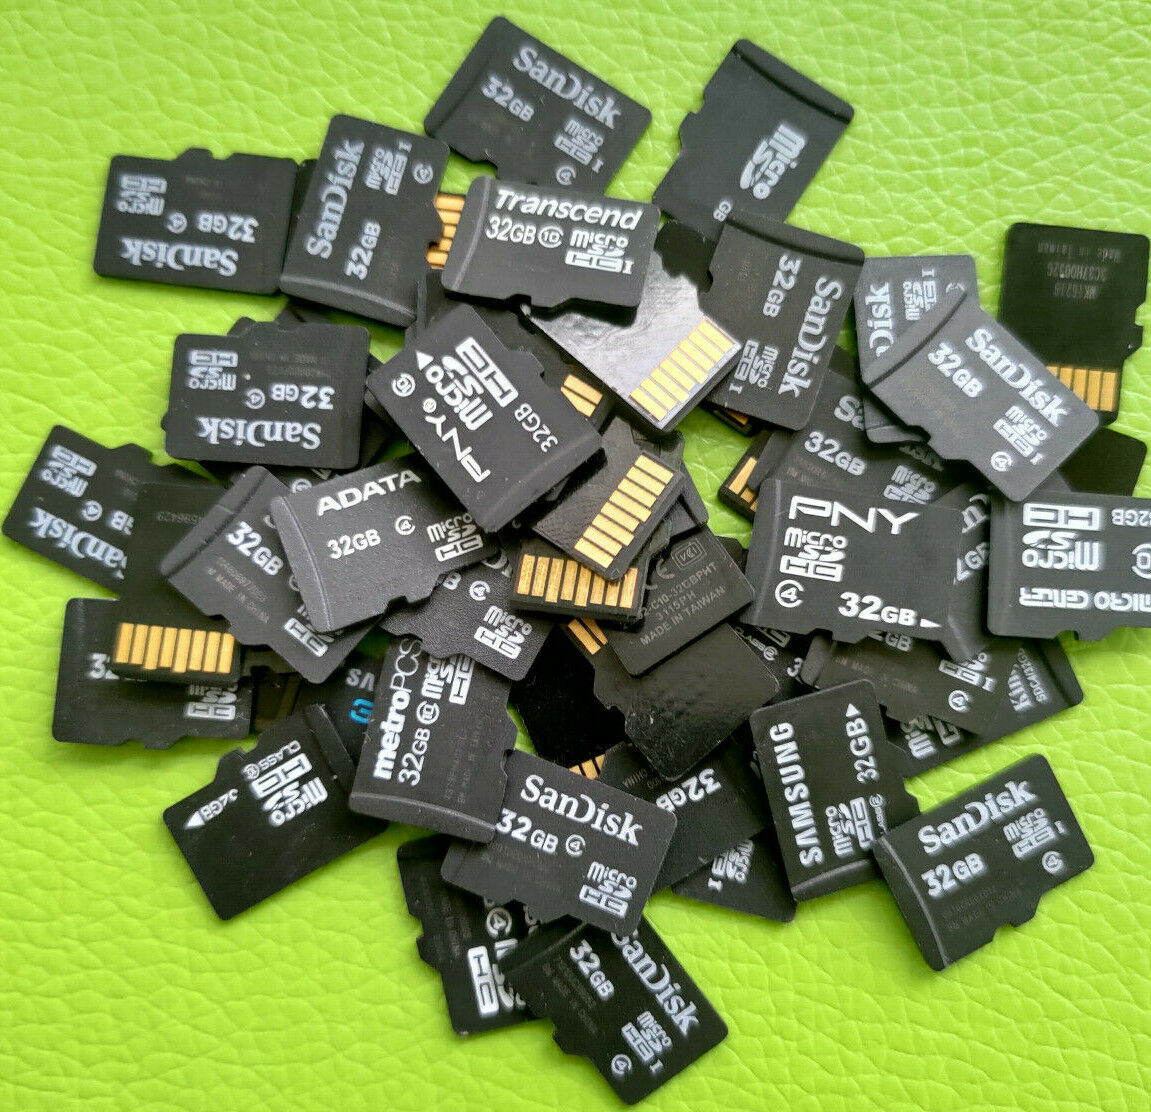 Lot of 5 32Gb micro SD memory cards - mixed brands sandisk samsung etc microsd